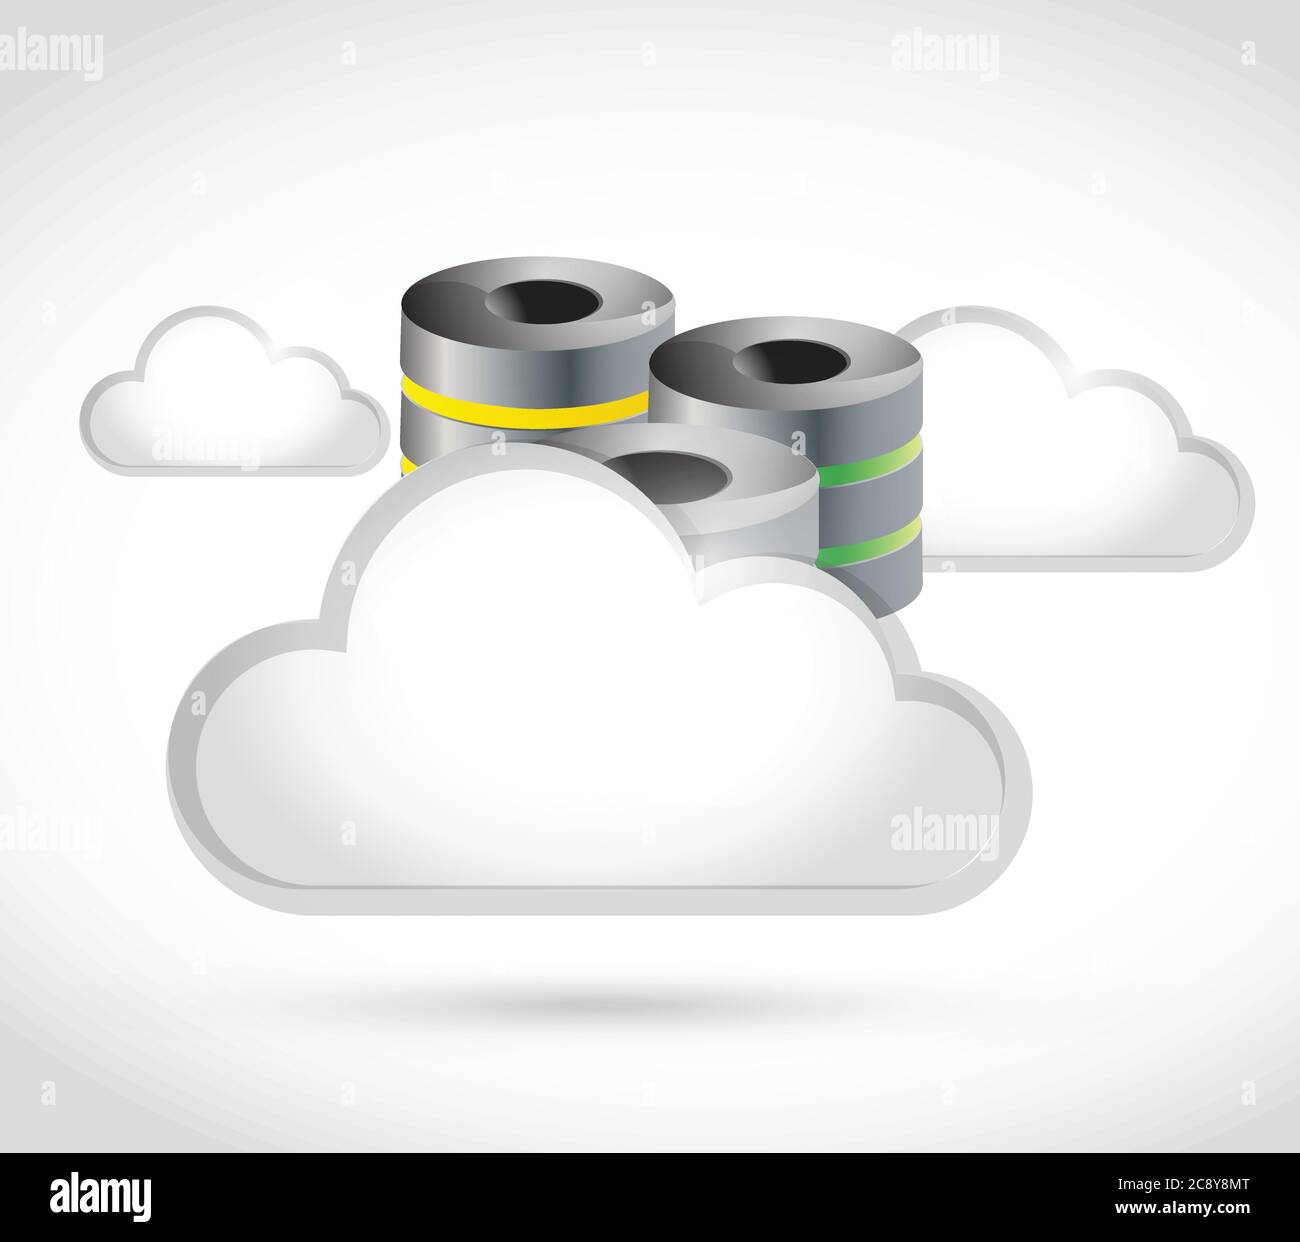 White clouds and storage illustration design over a white background Stock Vector